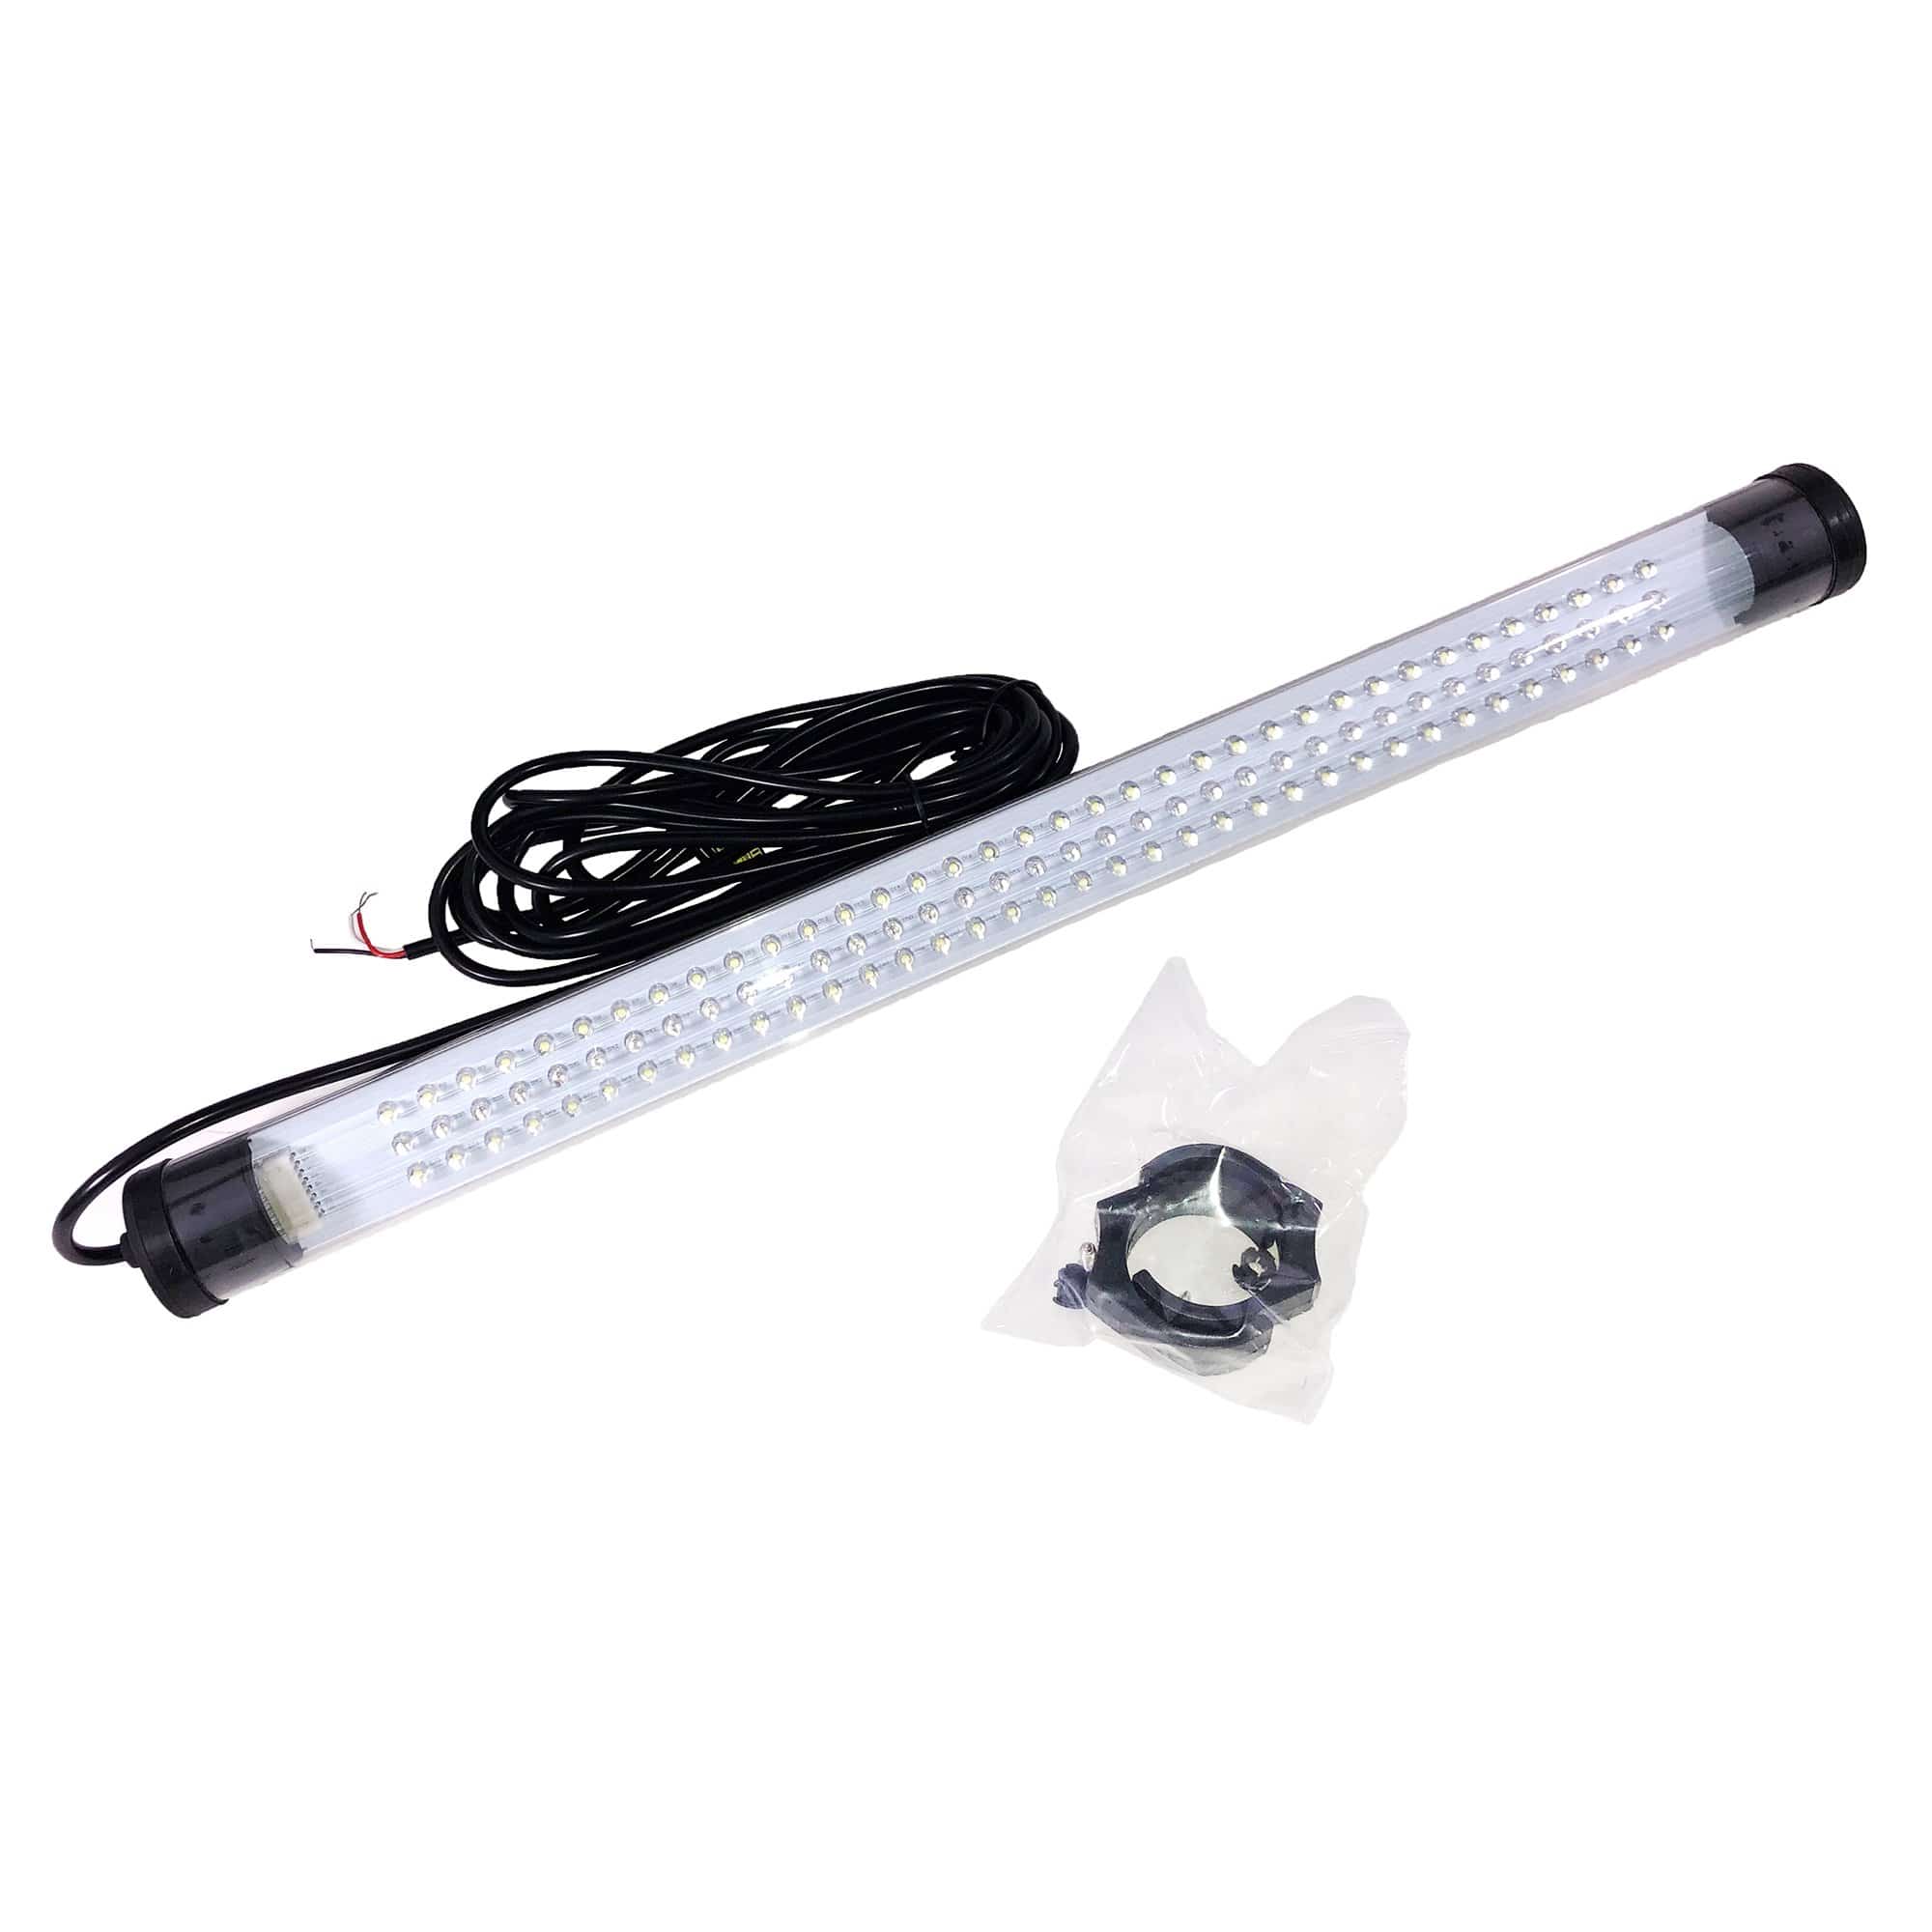 Taco F38-2060R-1 T-Top Red/White LED Tube Light w/ Cable